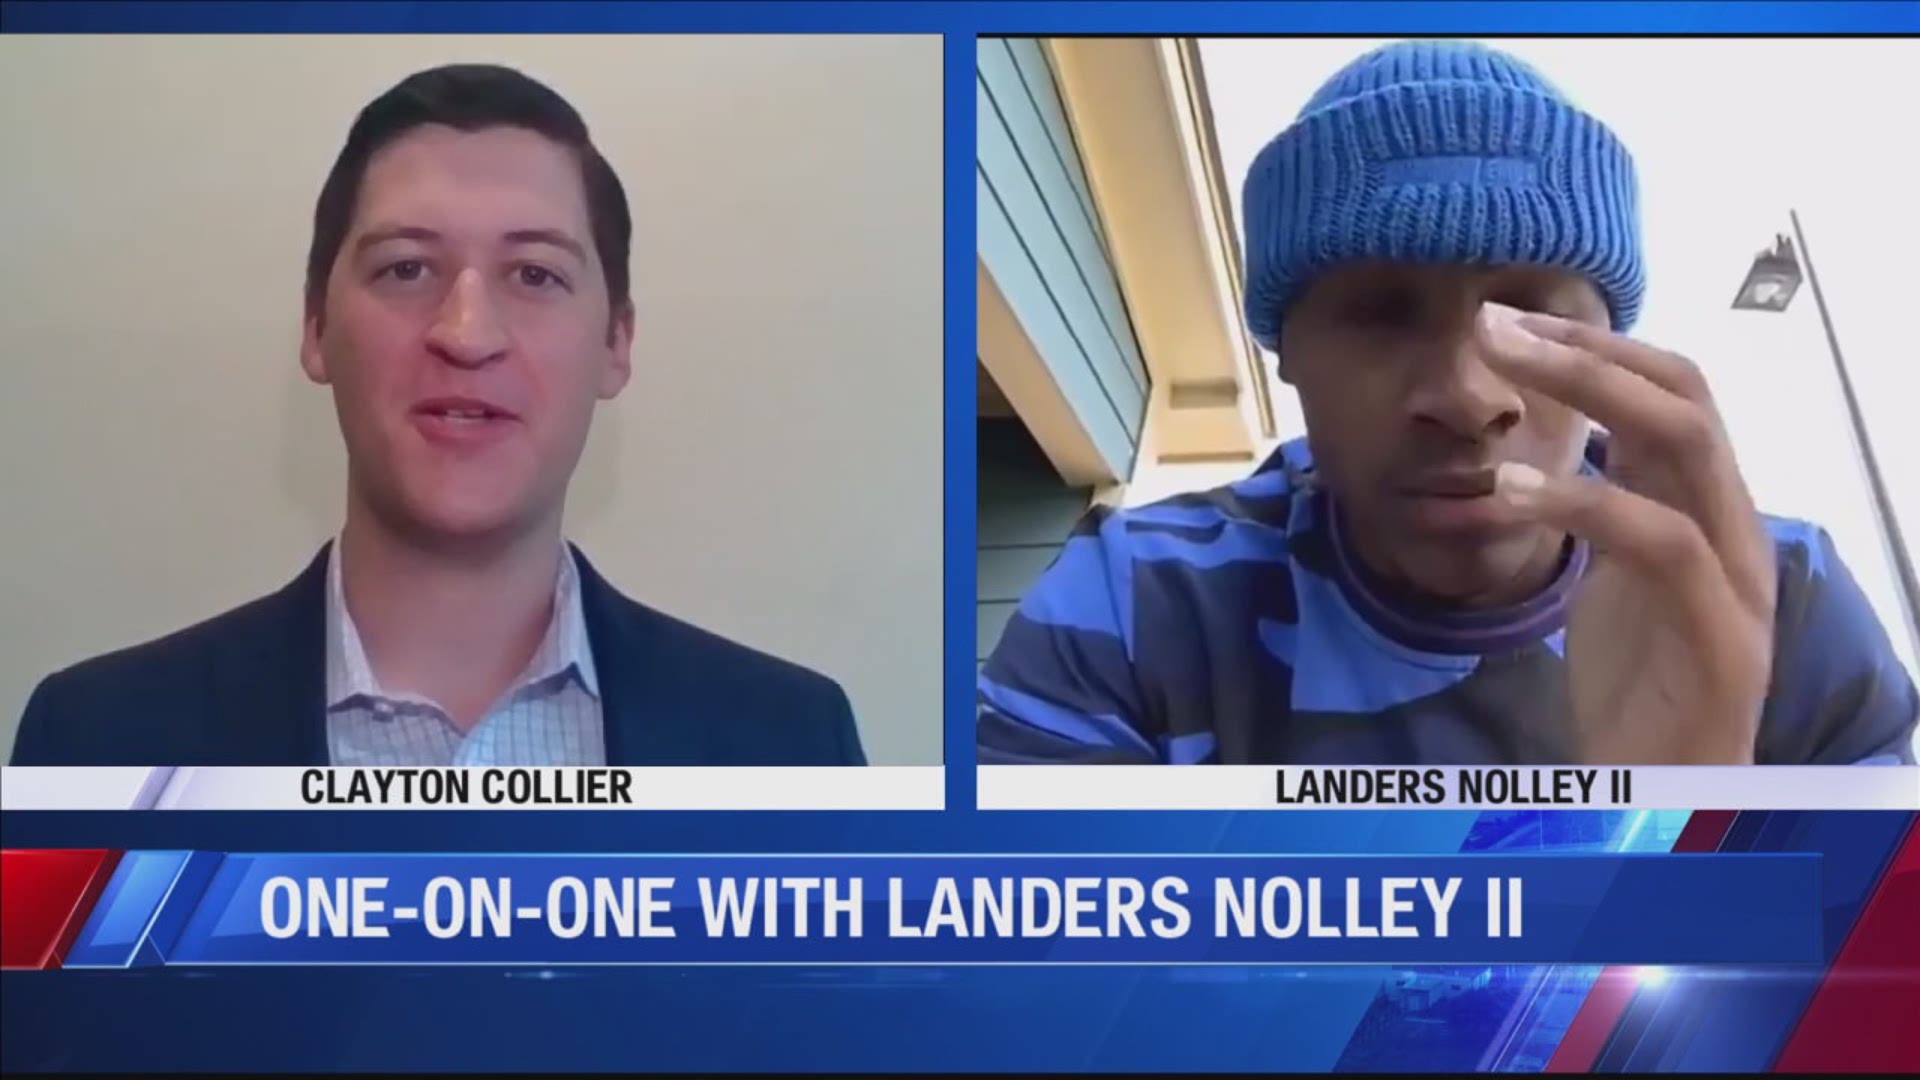 Local 24 Sports reporter Clayton Collier interviews Nolley, who was a member of the ACC all-freshman team and is transferring from Virginia Tech to Memphis